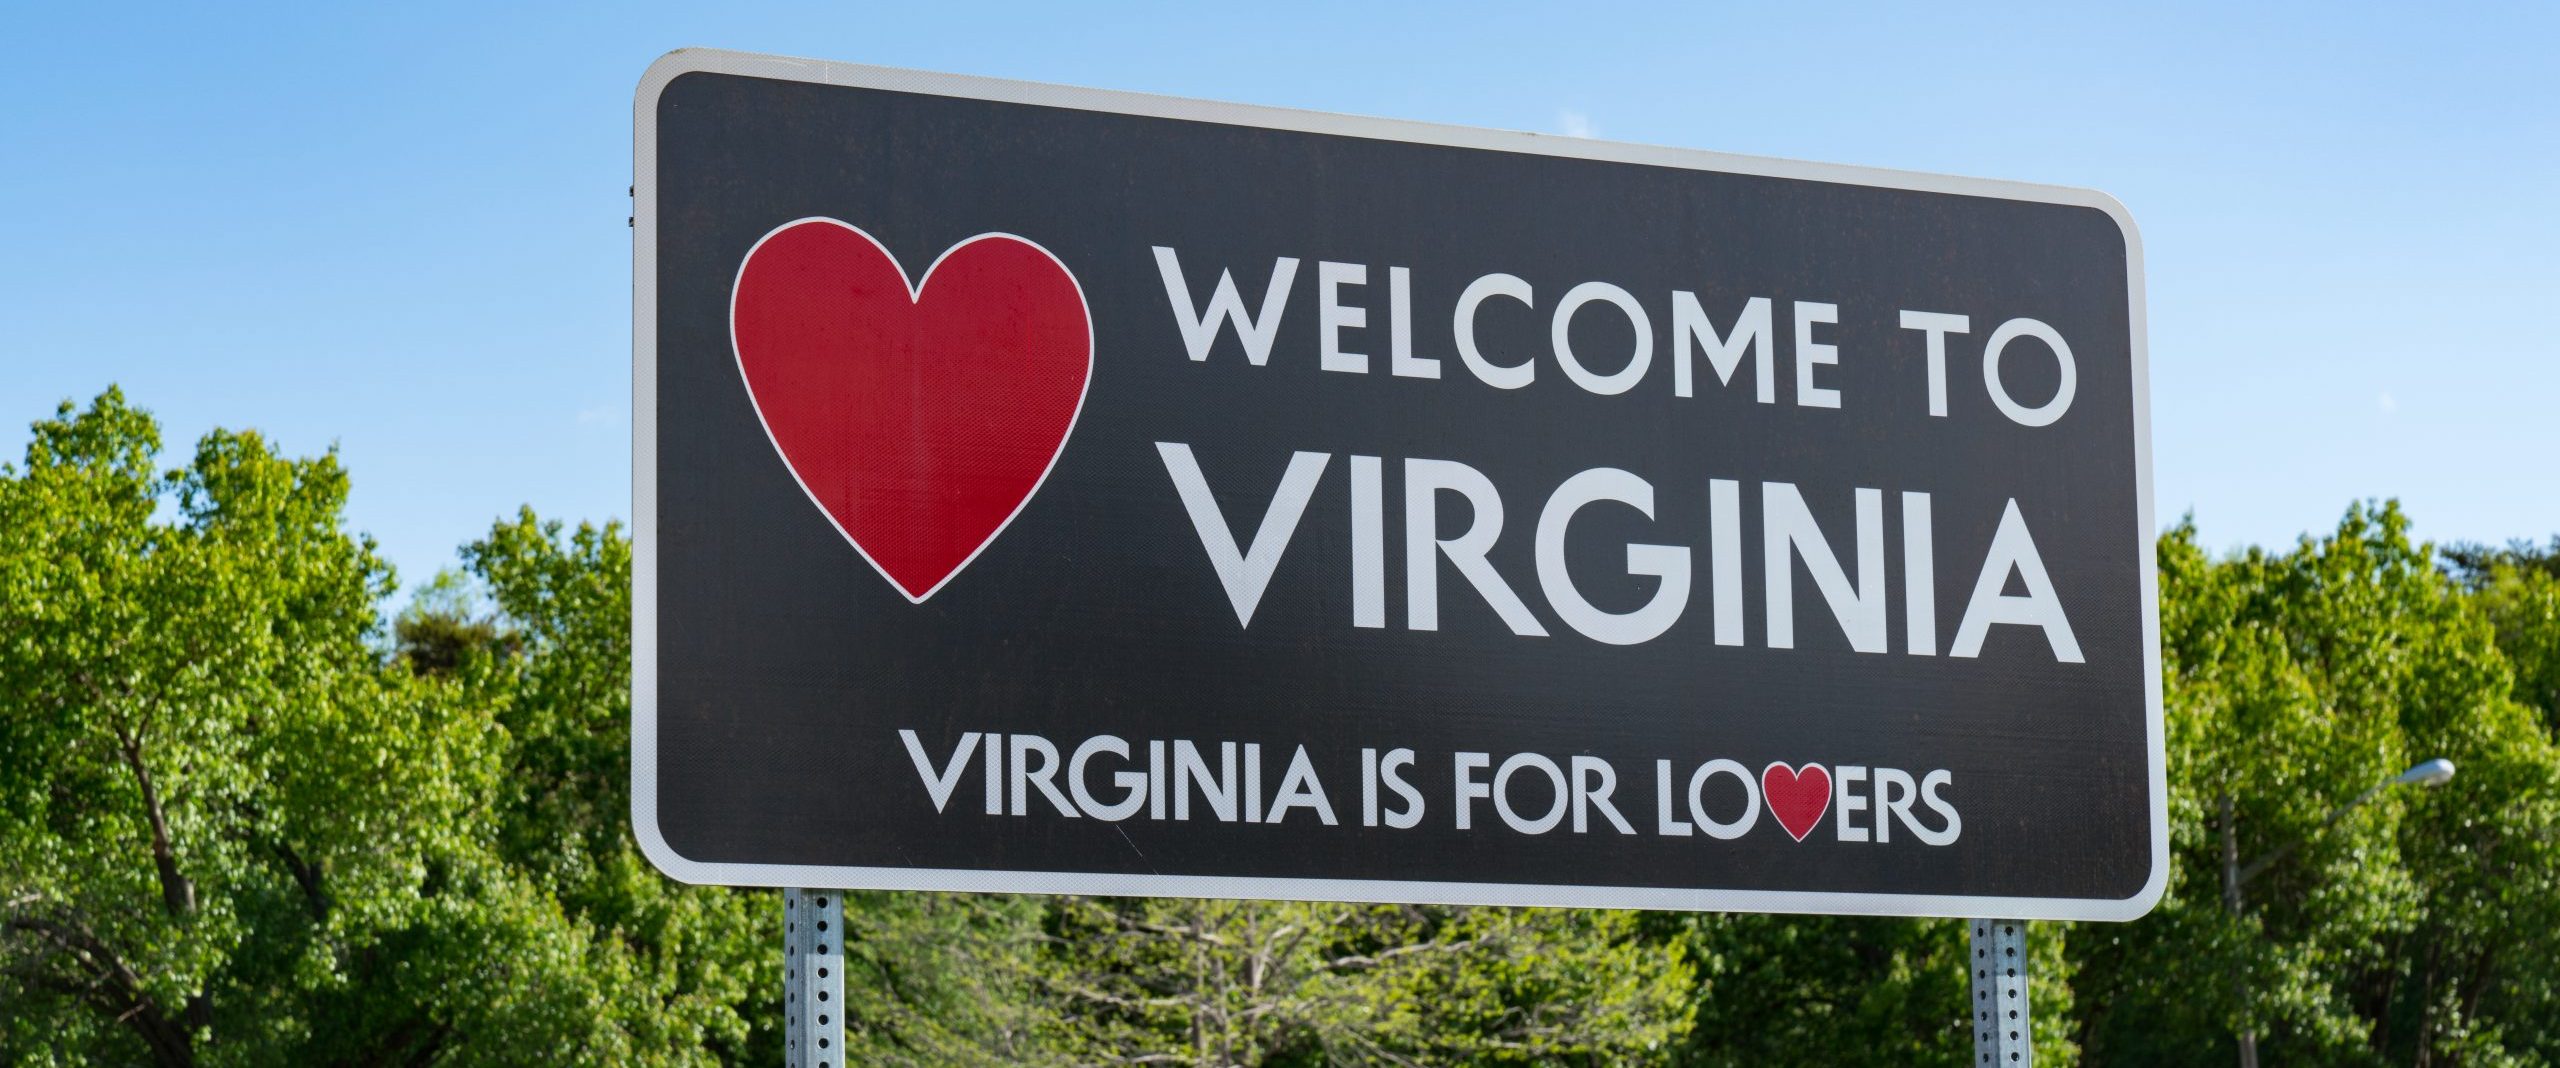 Welcome to Virginia Roadside Sign